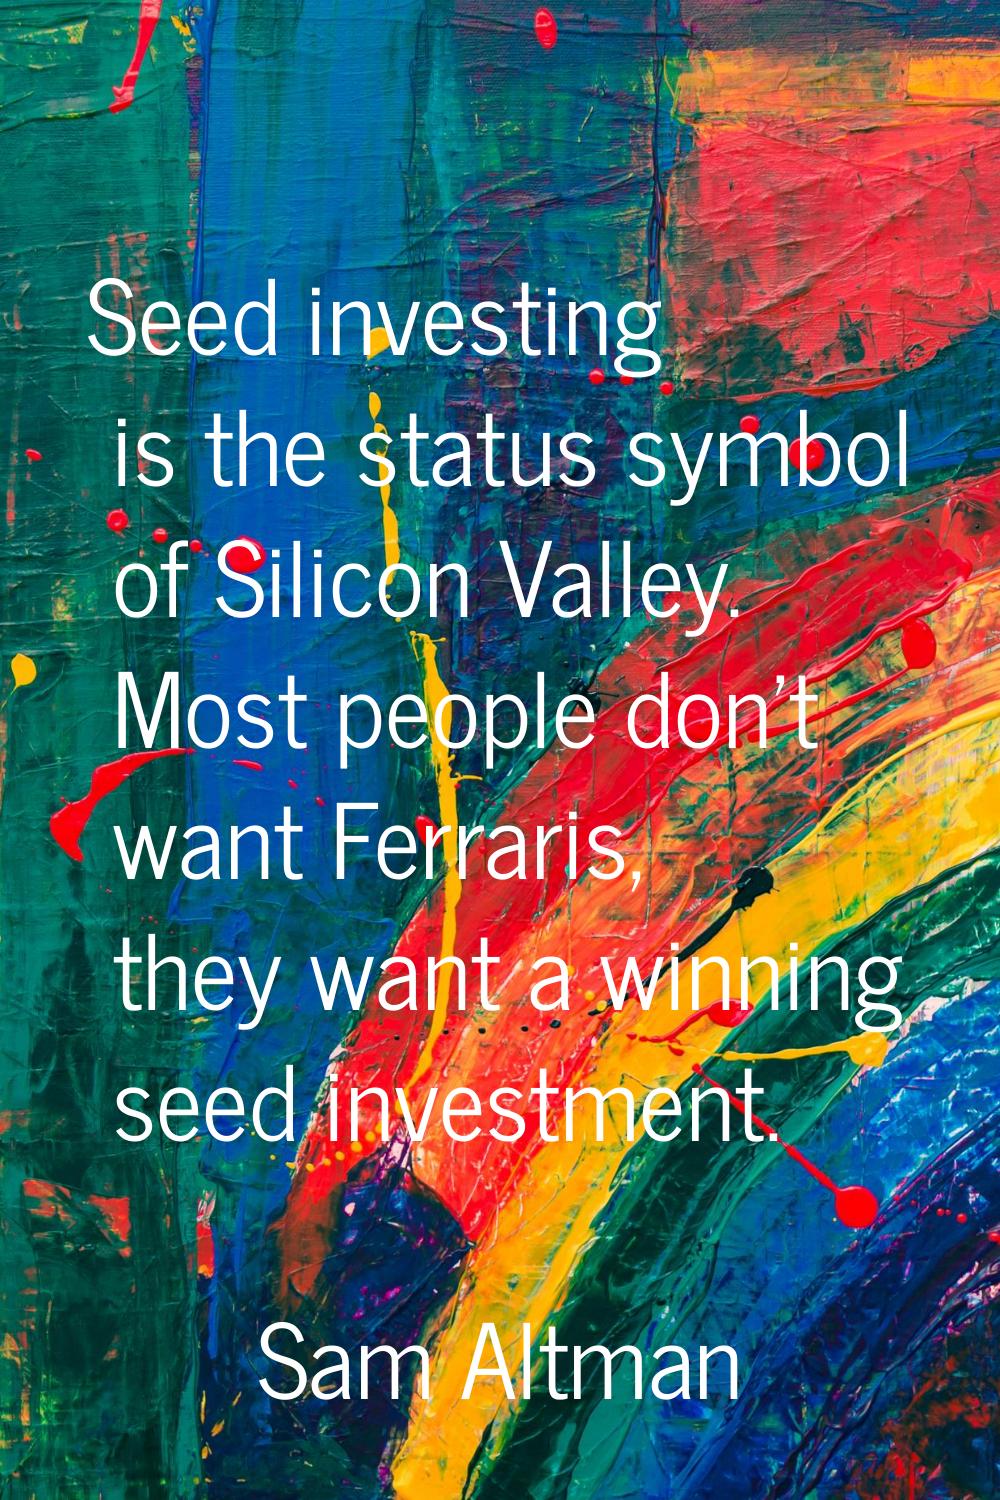 Seed investing is the status symbol of Silicon Valley. Most people don't want Ferraris, they want a